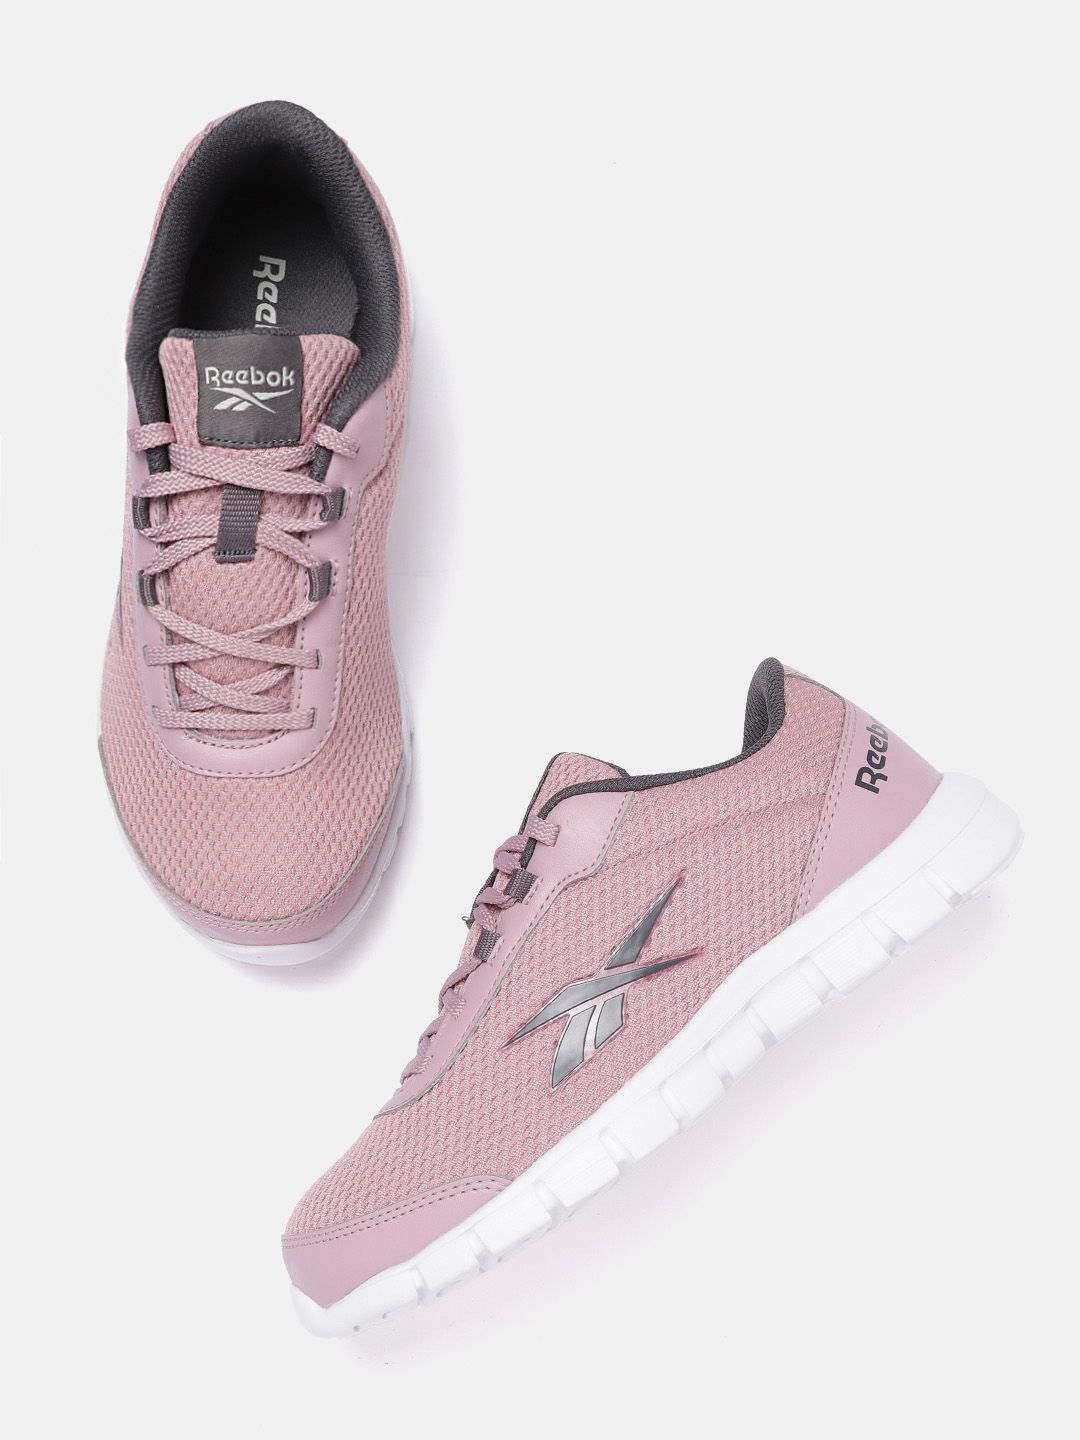 Reebok Women Lilac Woven Design Runner Shoes Price in India